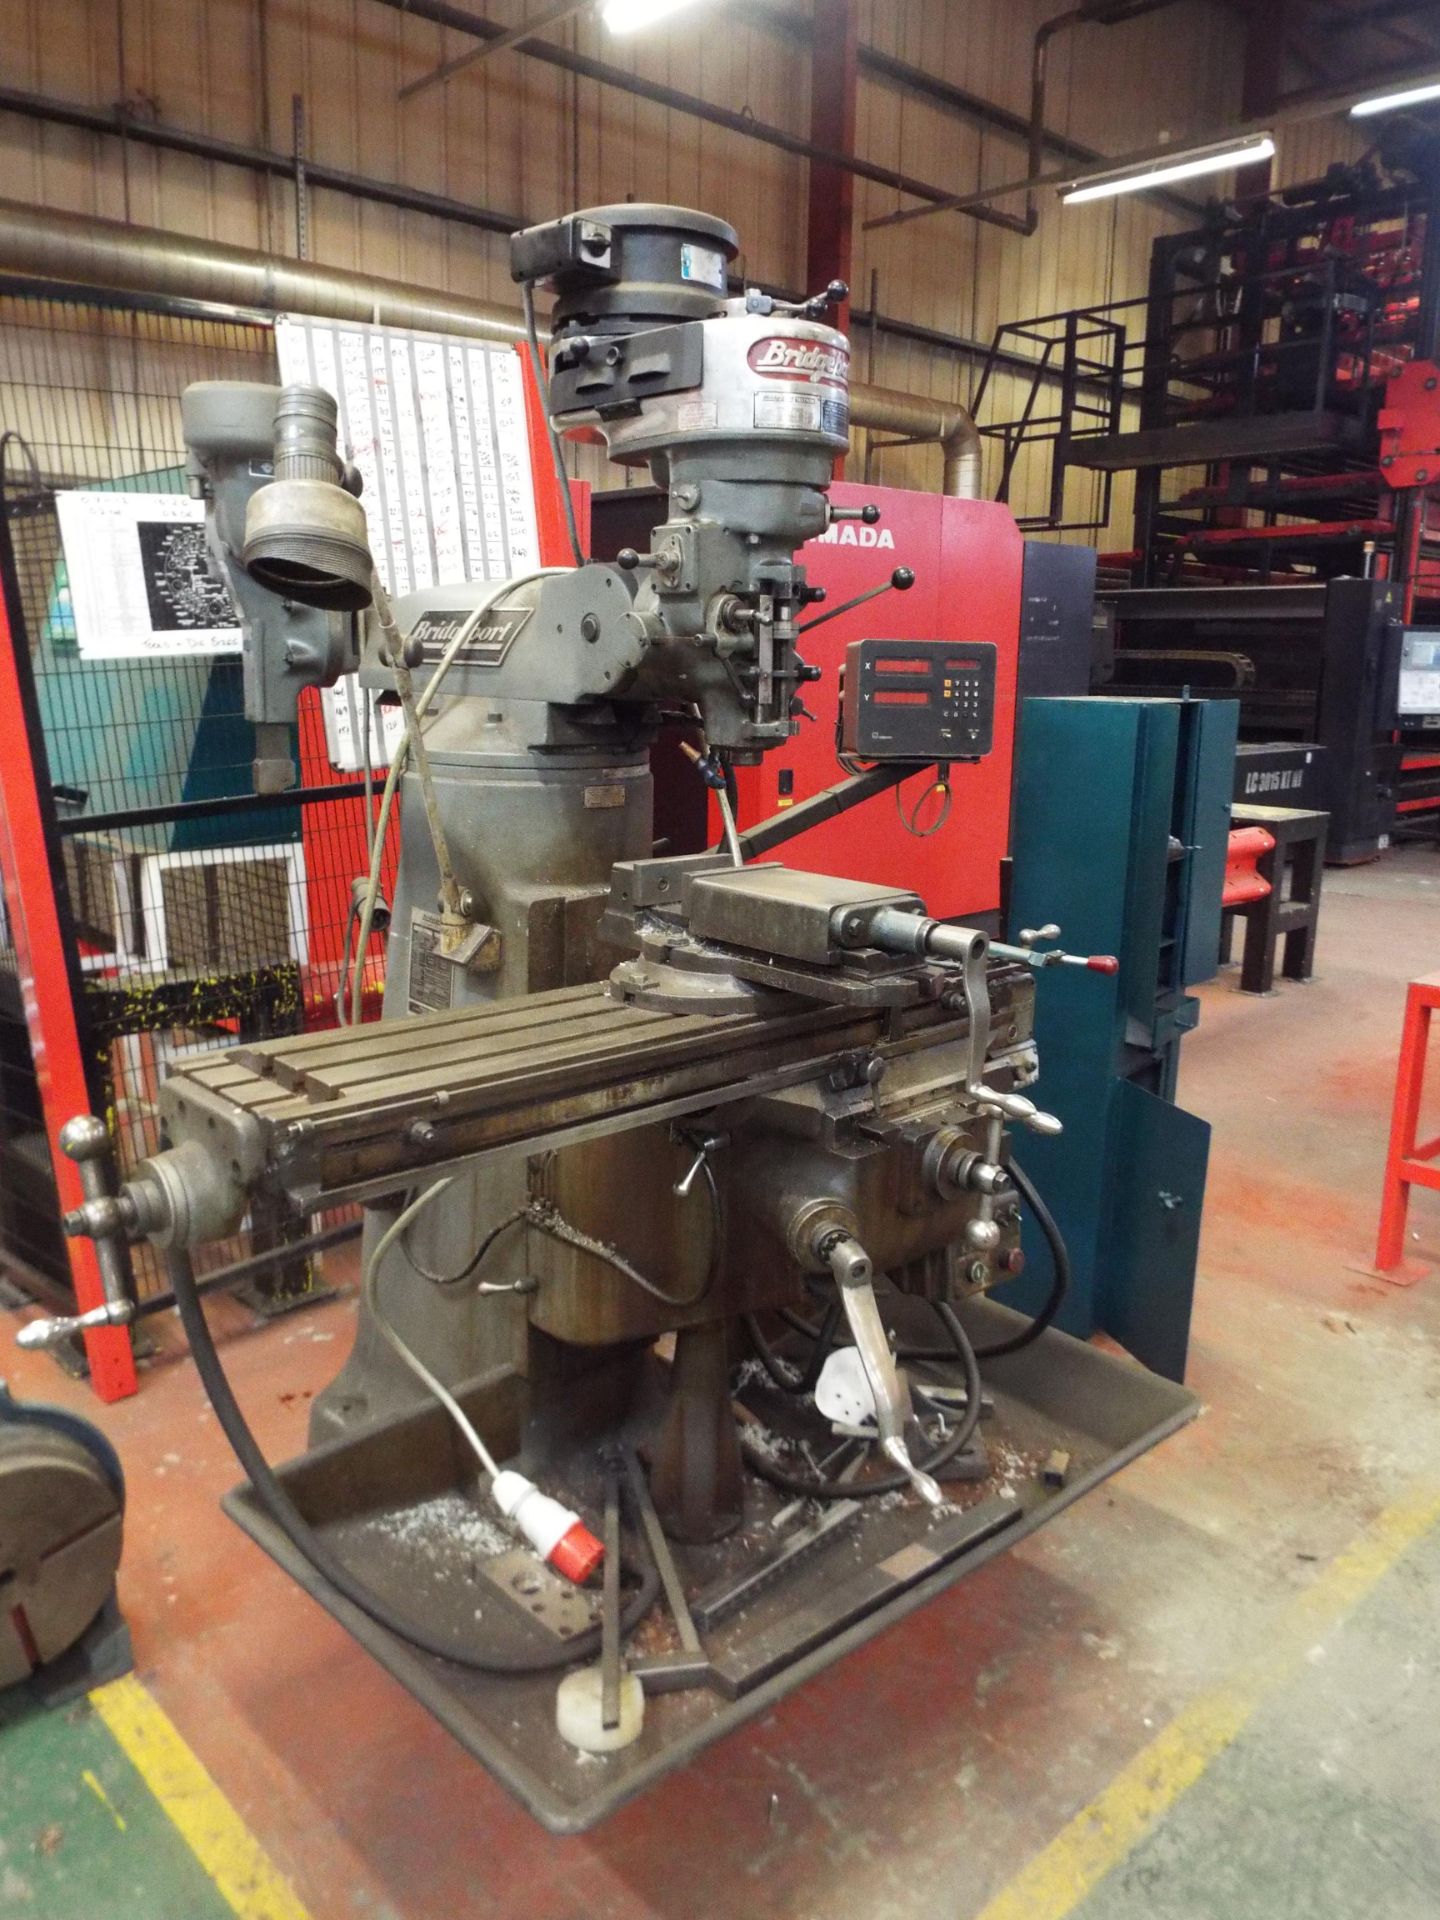 Bridgeport Turret Milling Machine with Shaping Attachment